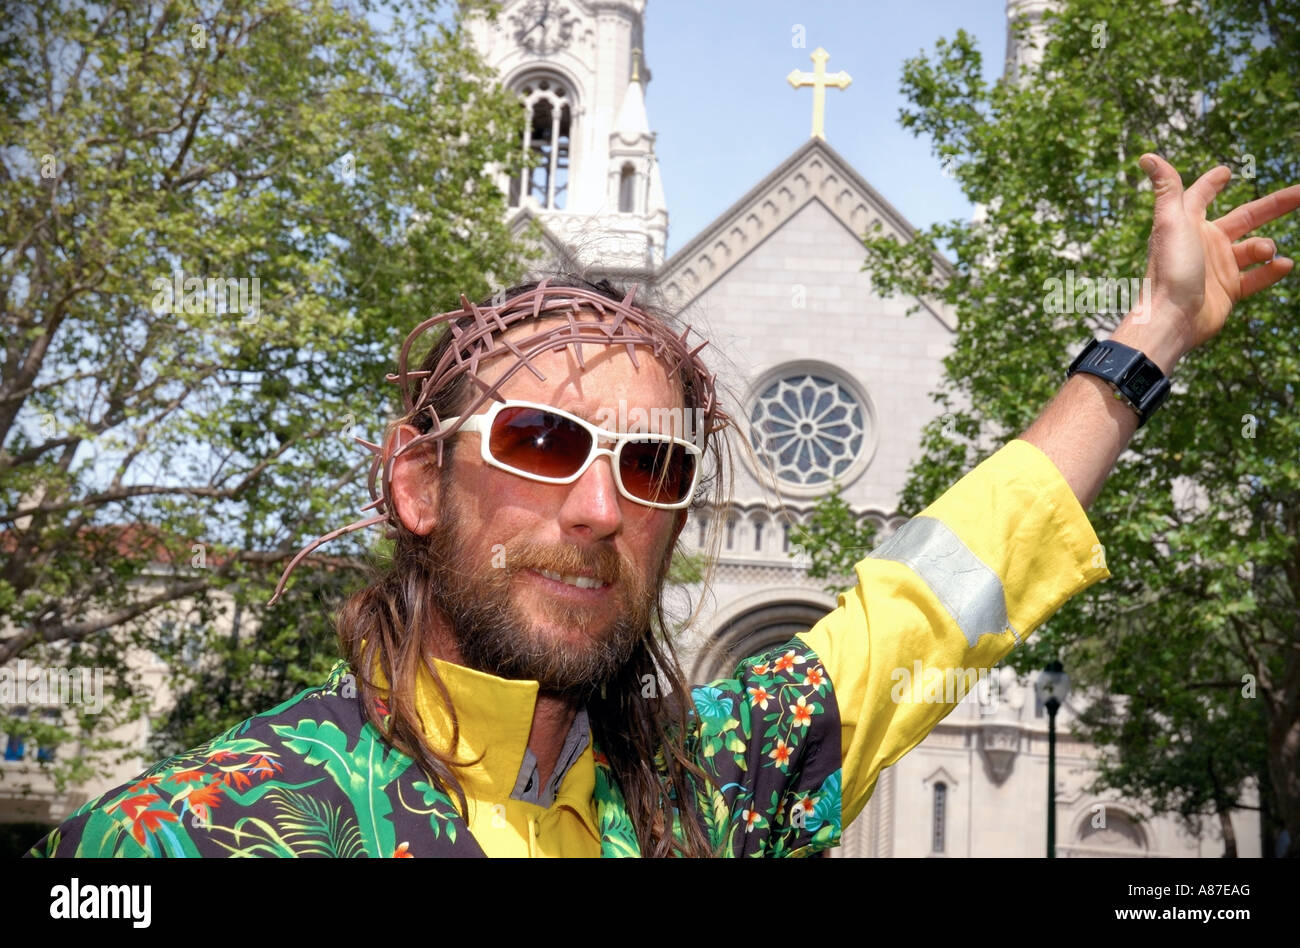 Street performer portraying Jesus poses in front of St. Peter and Paul Church, San Francisco California Stock Photo